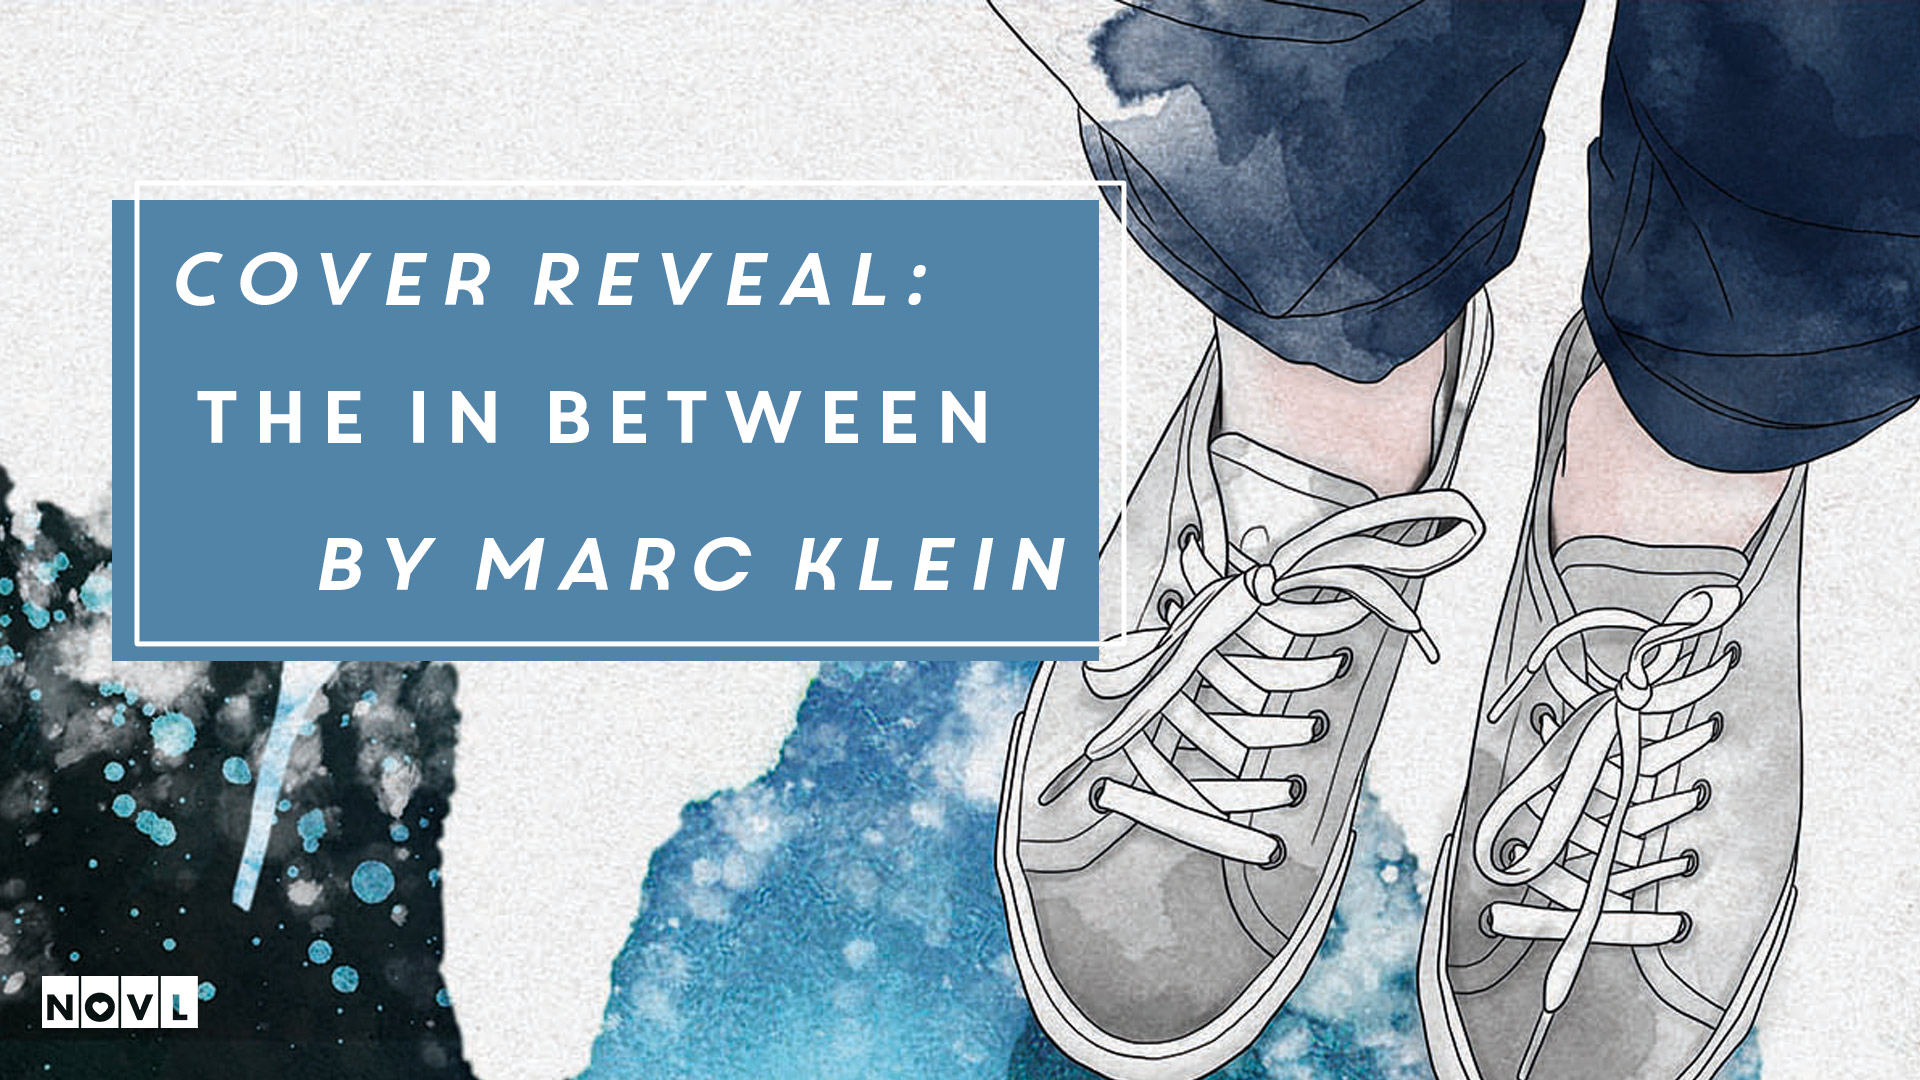 The NOVL Blog, Featured Image for Article: Cover Reveal: The In Between by Marc Klein